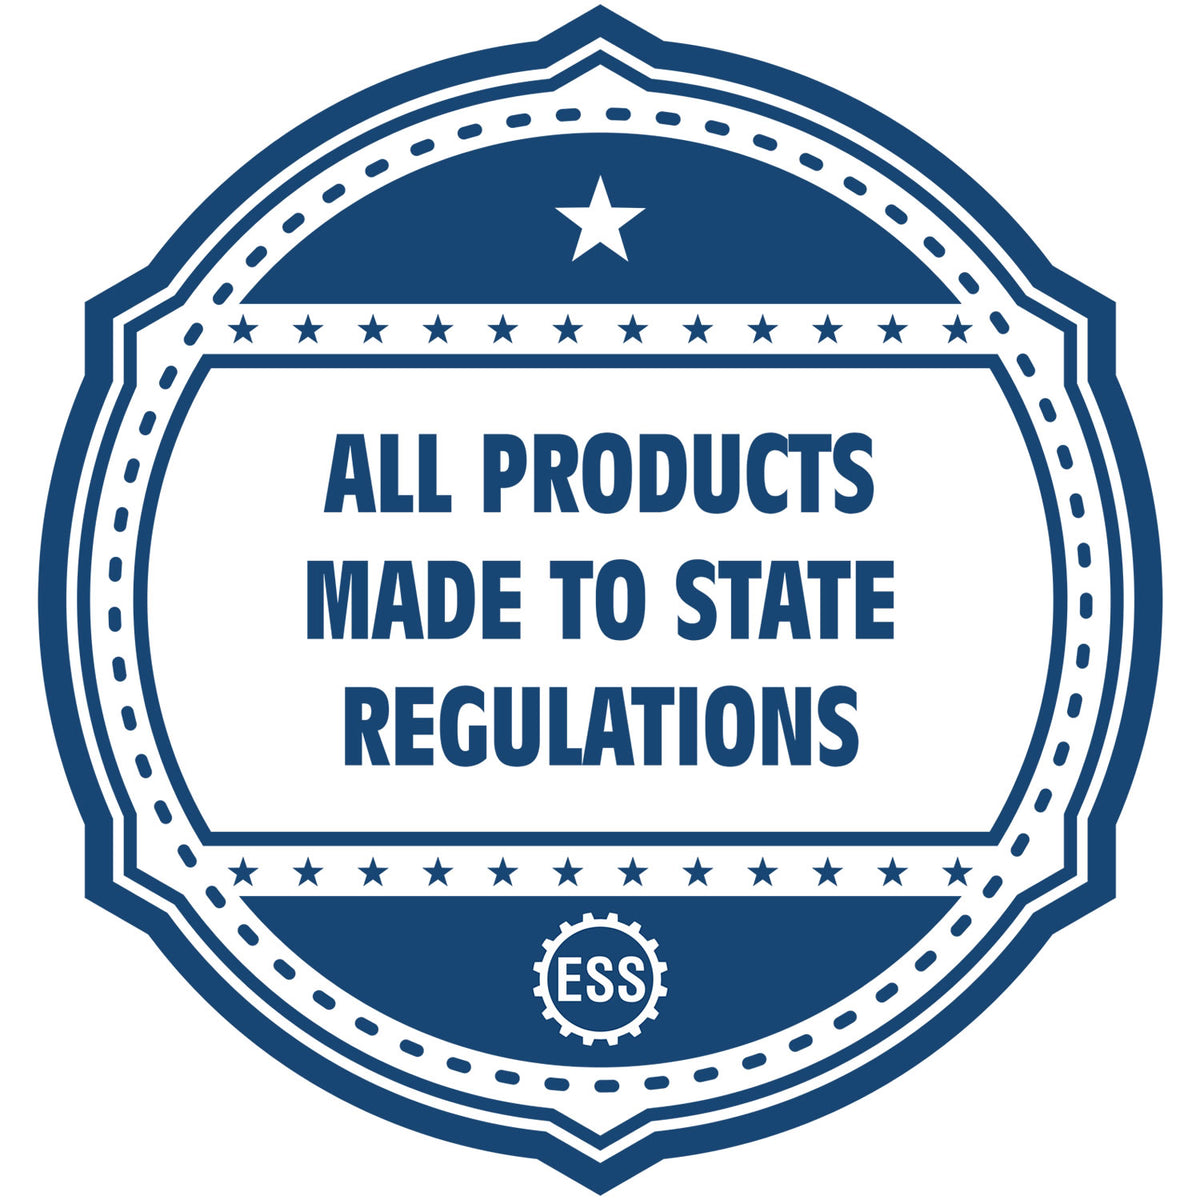 An icon or badge element for the Heavy Duty Cast Iron Kentucky Engineer Seal Embosser showing that this product is made in compliance with state regulations.